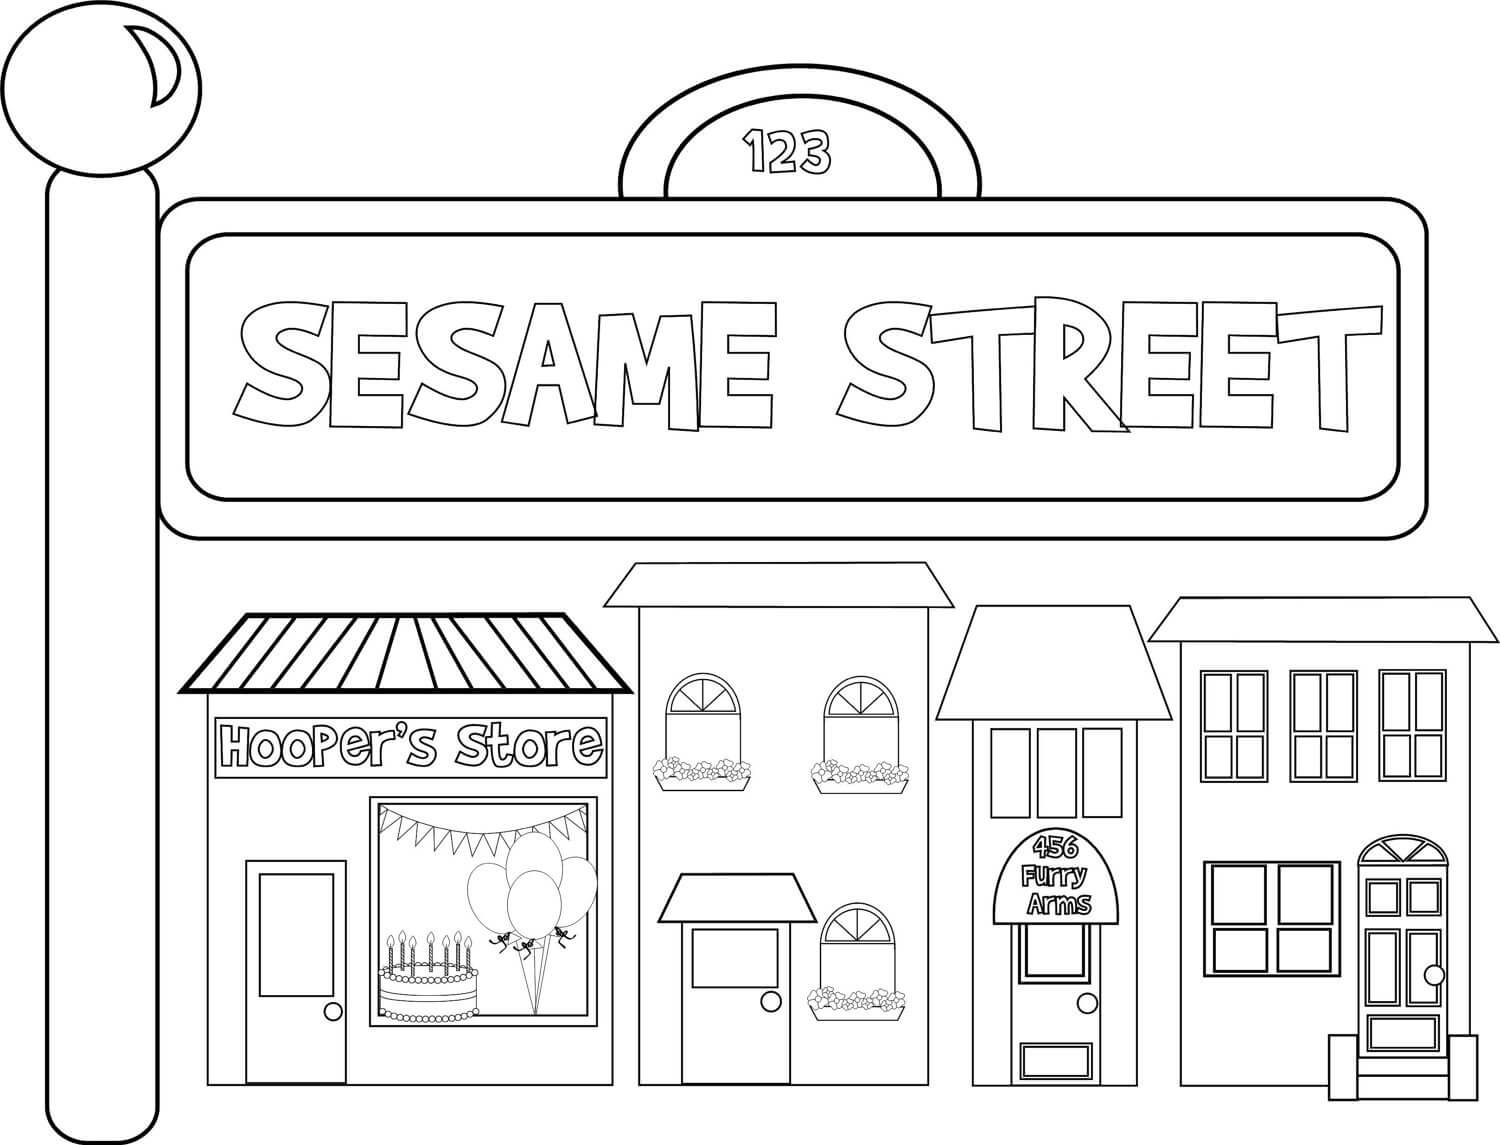 Sesame Street Coloring Pages2